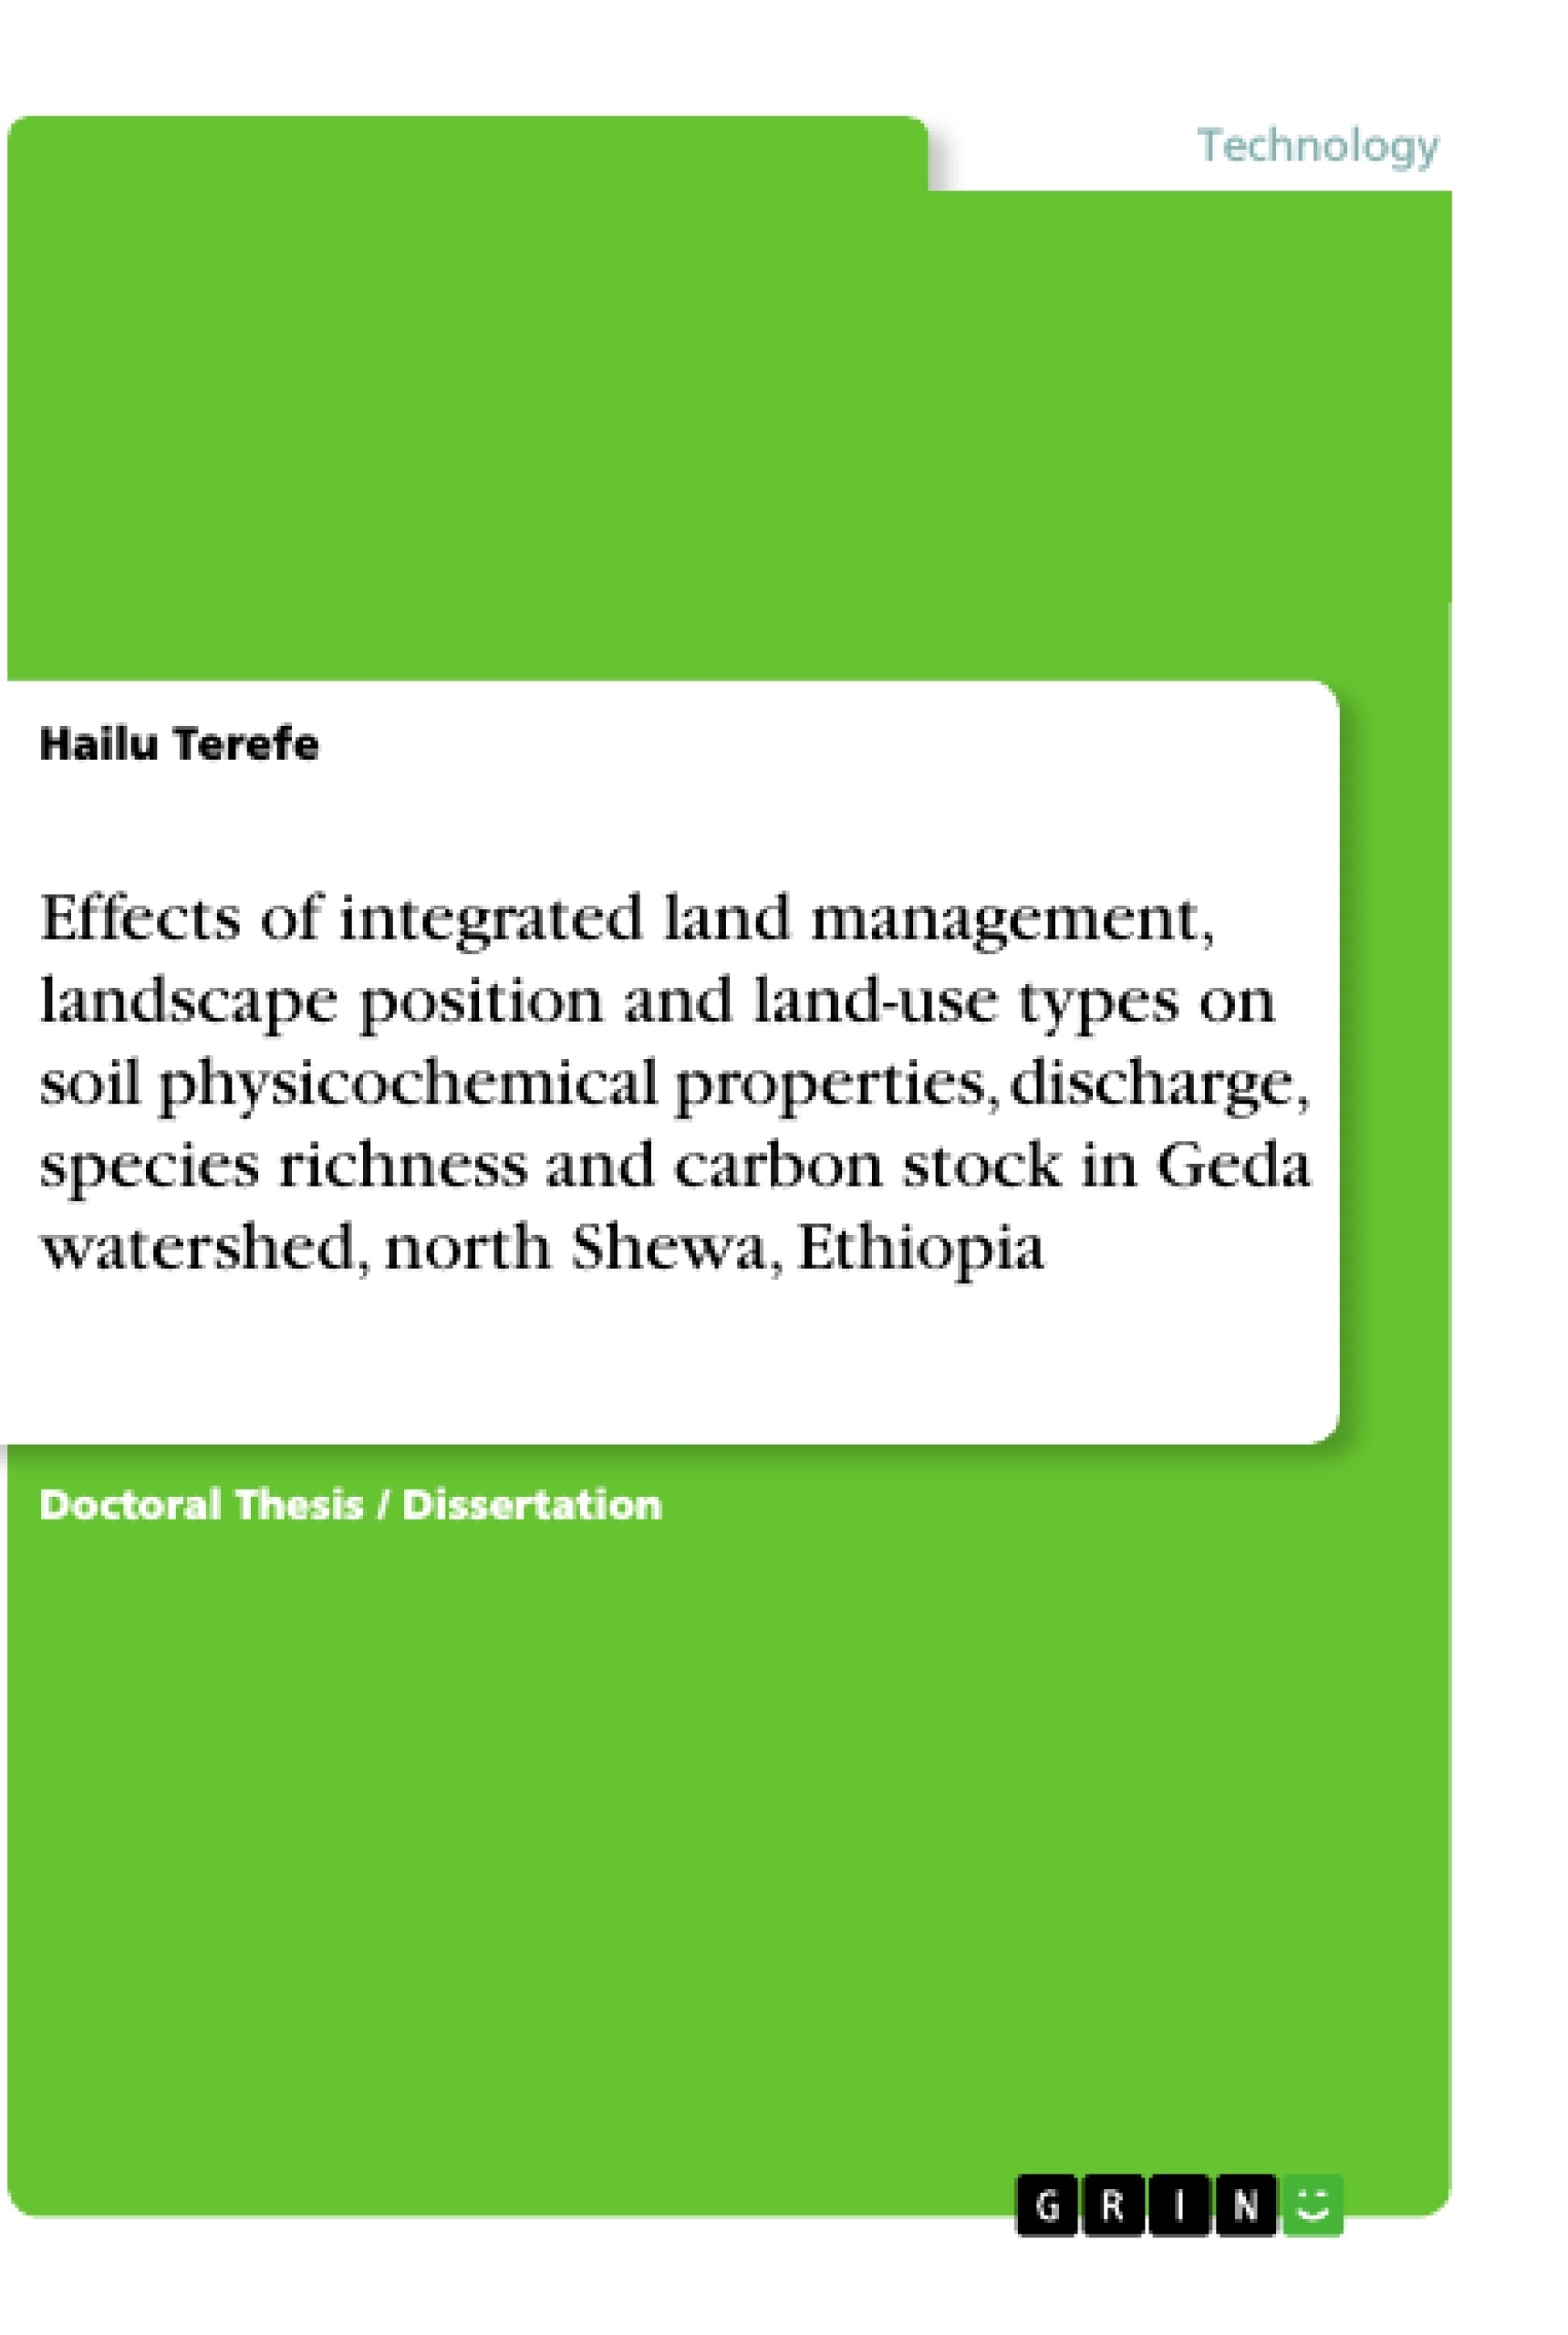 Titre: Effects of integrated land management, landscape position and land-use types on soil physicochemical properties, discharge, species richness and carbon stock in Geda watershed, north Shewa, Ethiopia